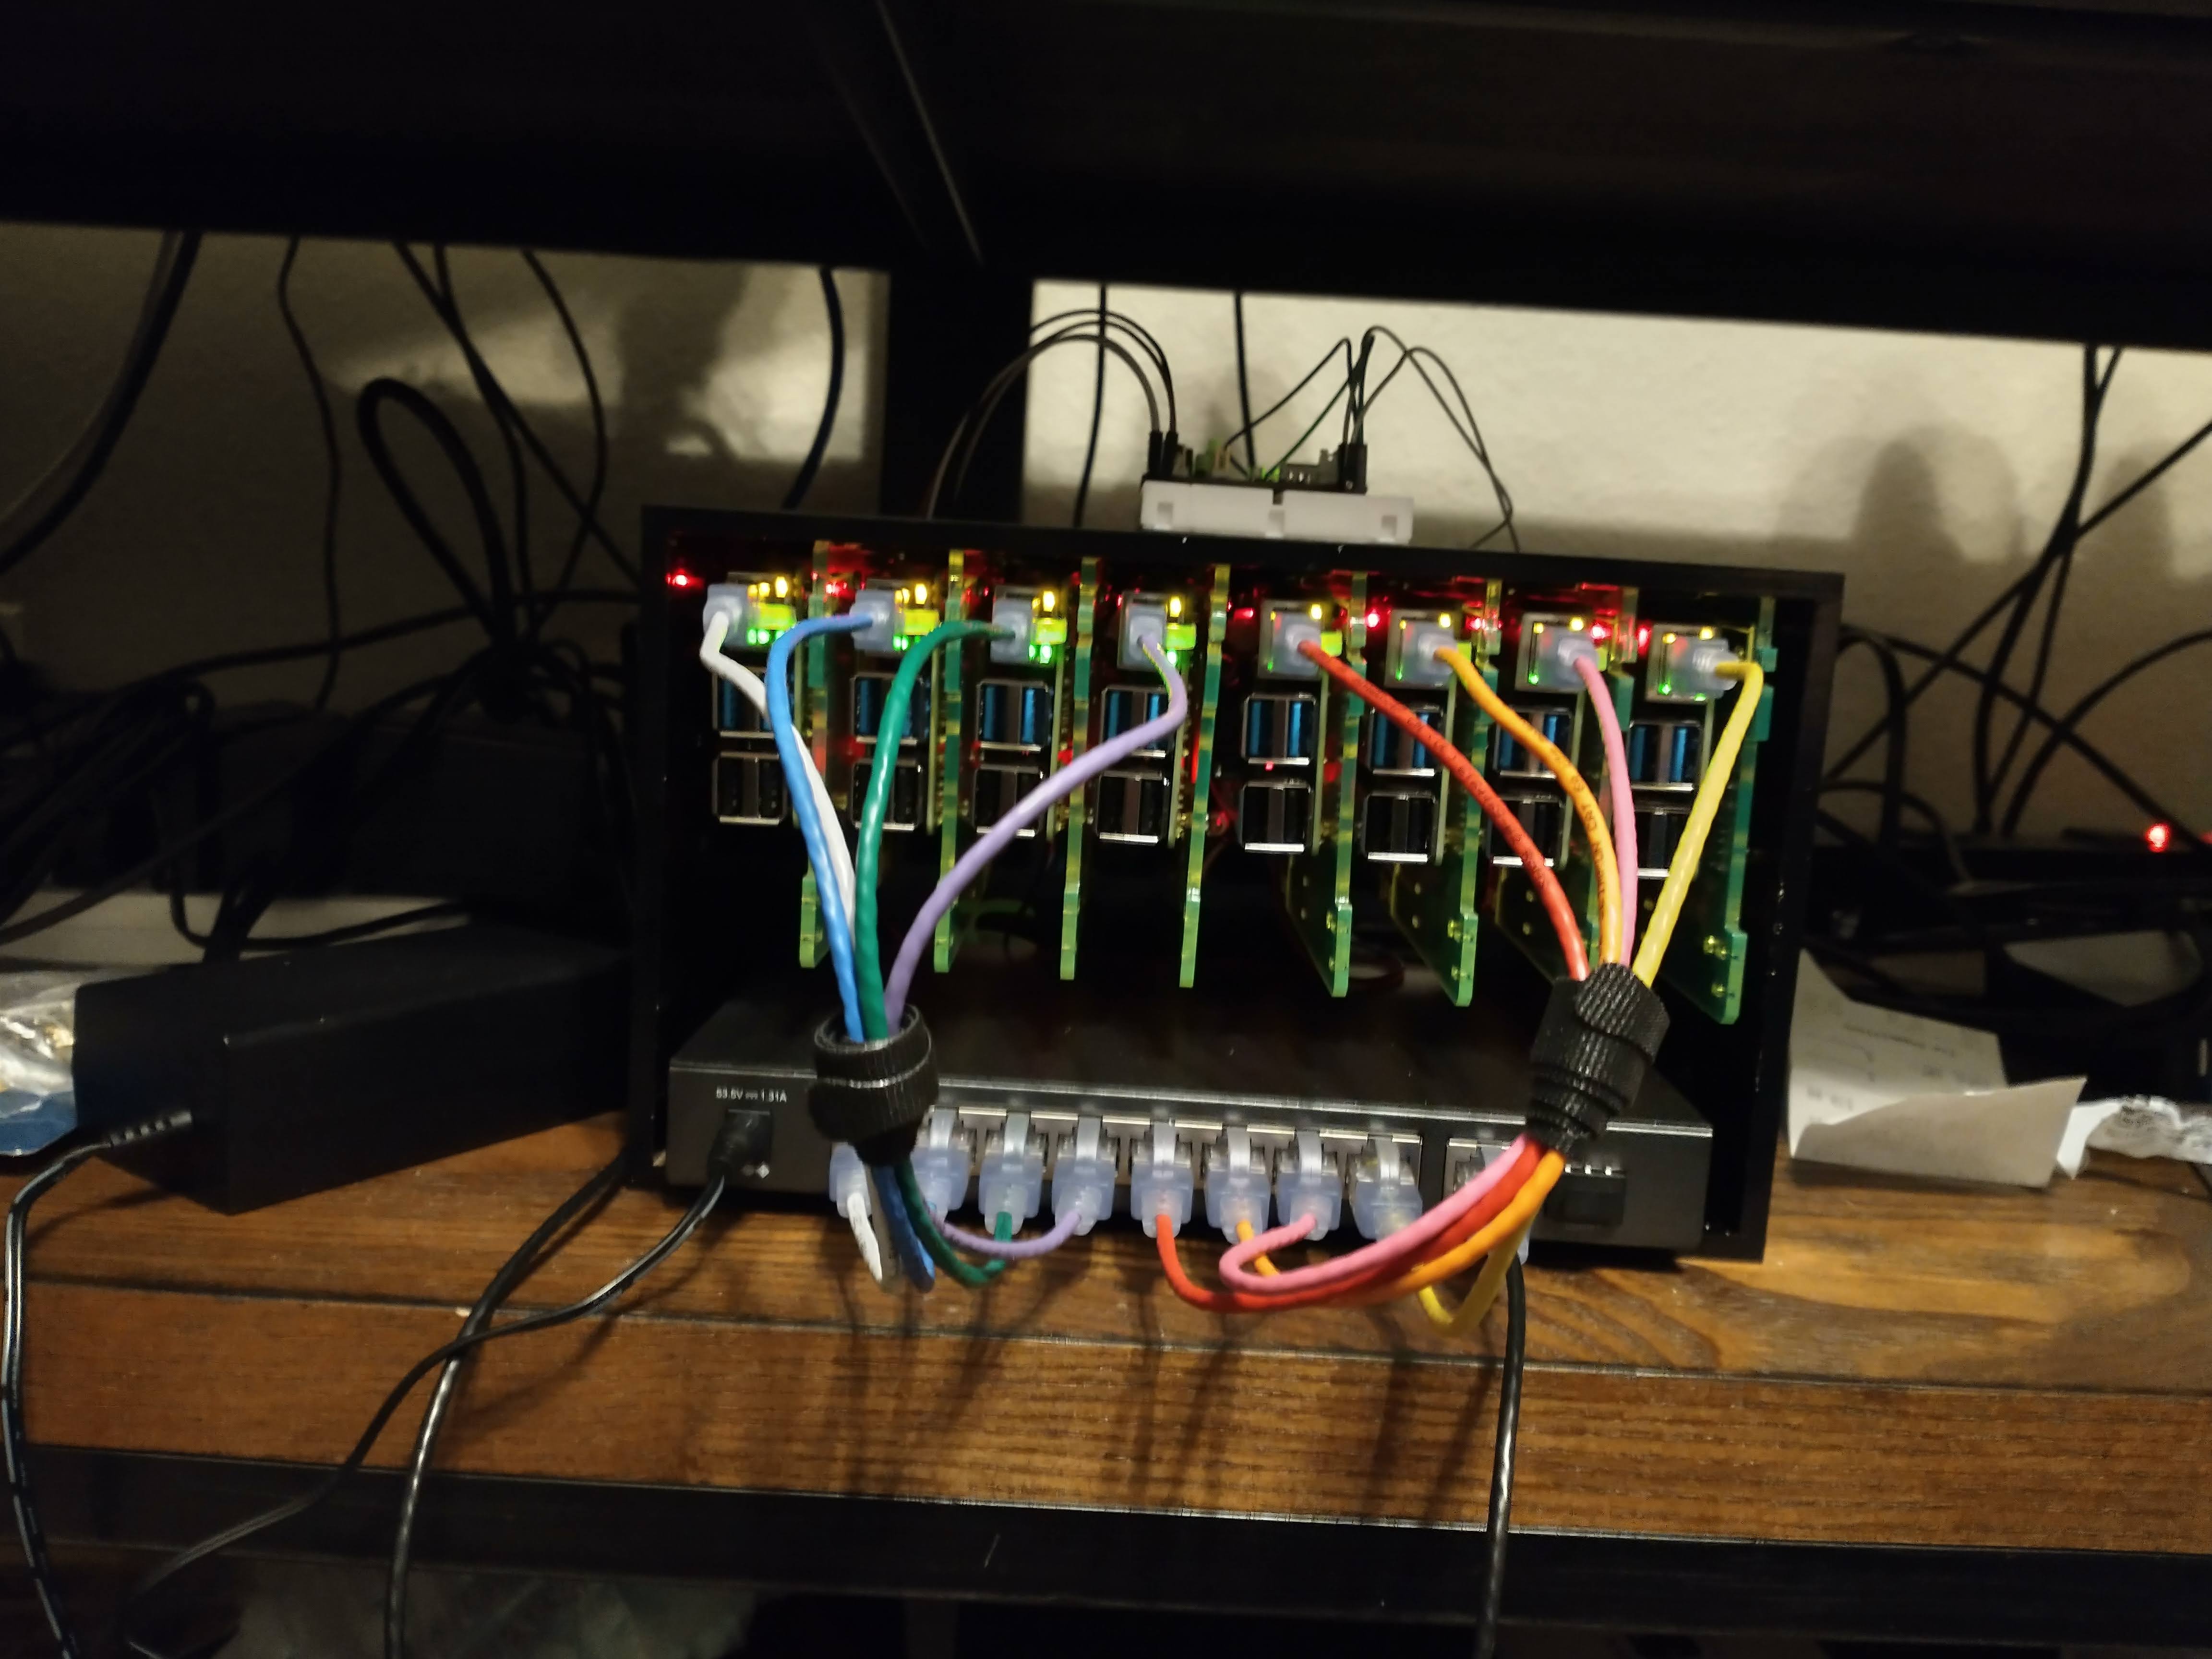 The Pi cluster, in all its glory